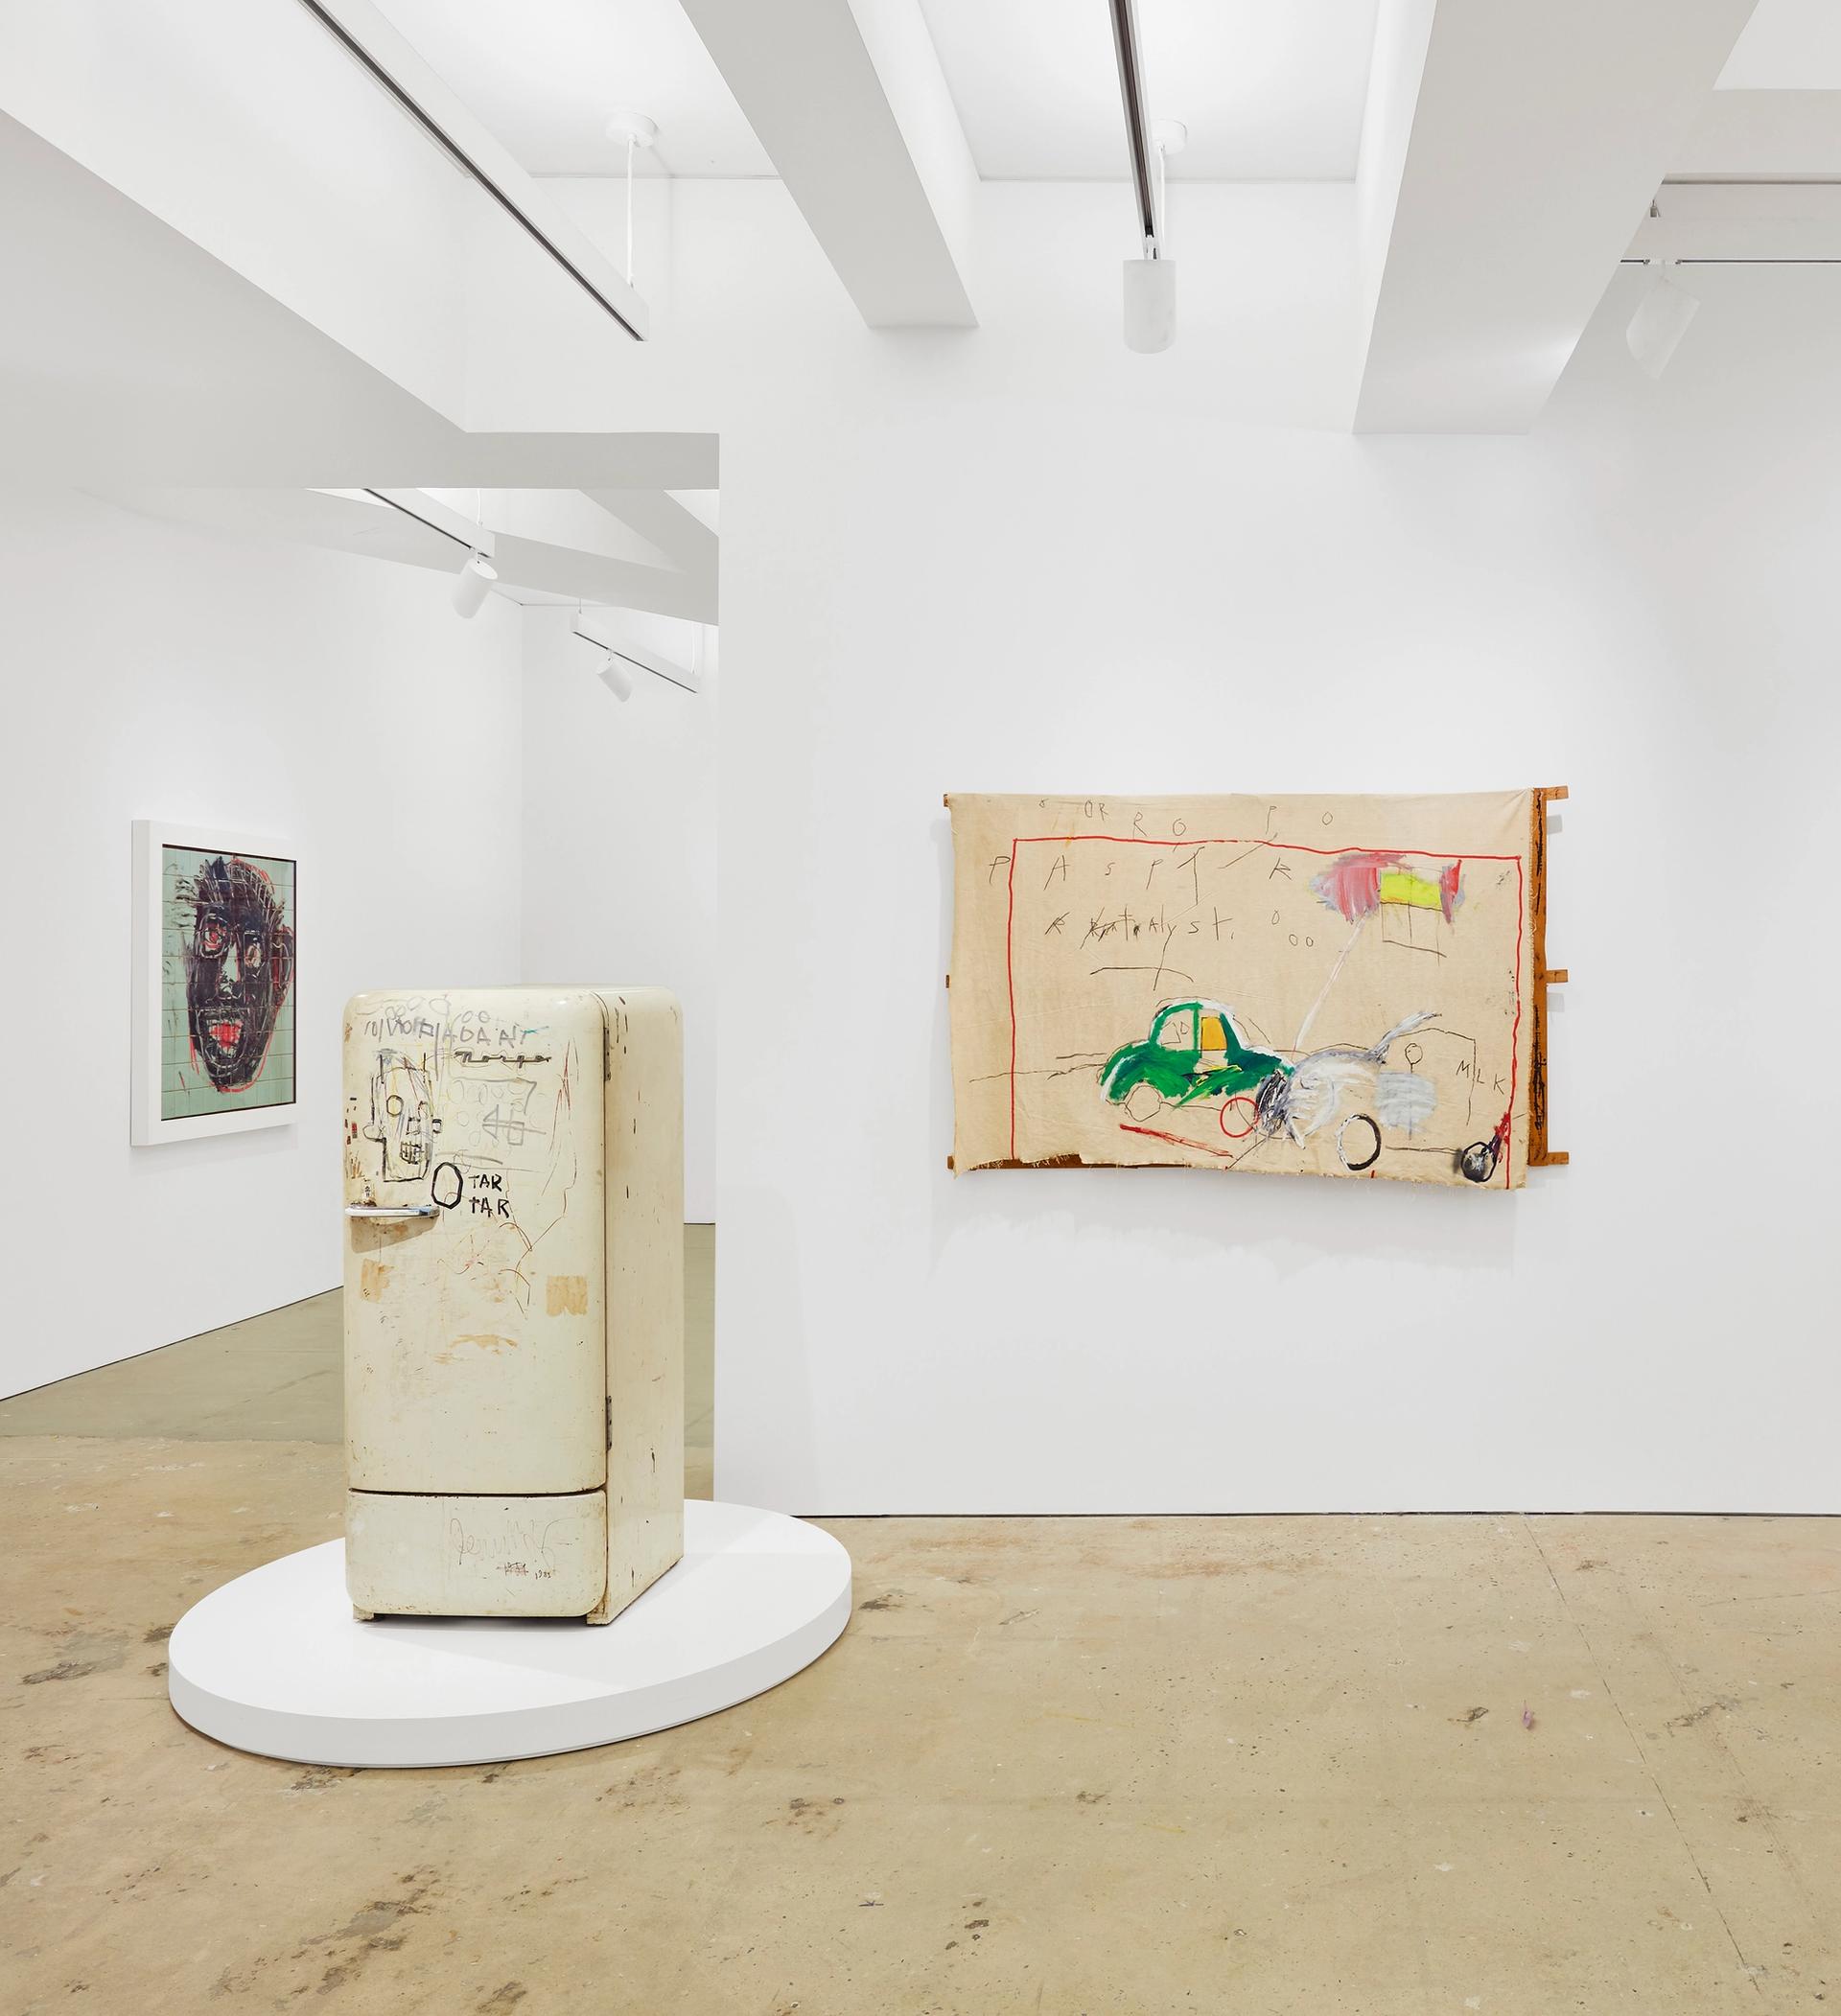 An install of Jean-Michel Basquiat: Art and Objecthood at Nahmad Contemporary gallery in New York including Untitled (Refrigerator, 1981) from the Nicola Erni Collection in Switzerland Photo: Nahmad Contemporary